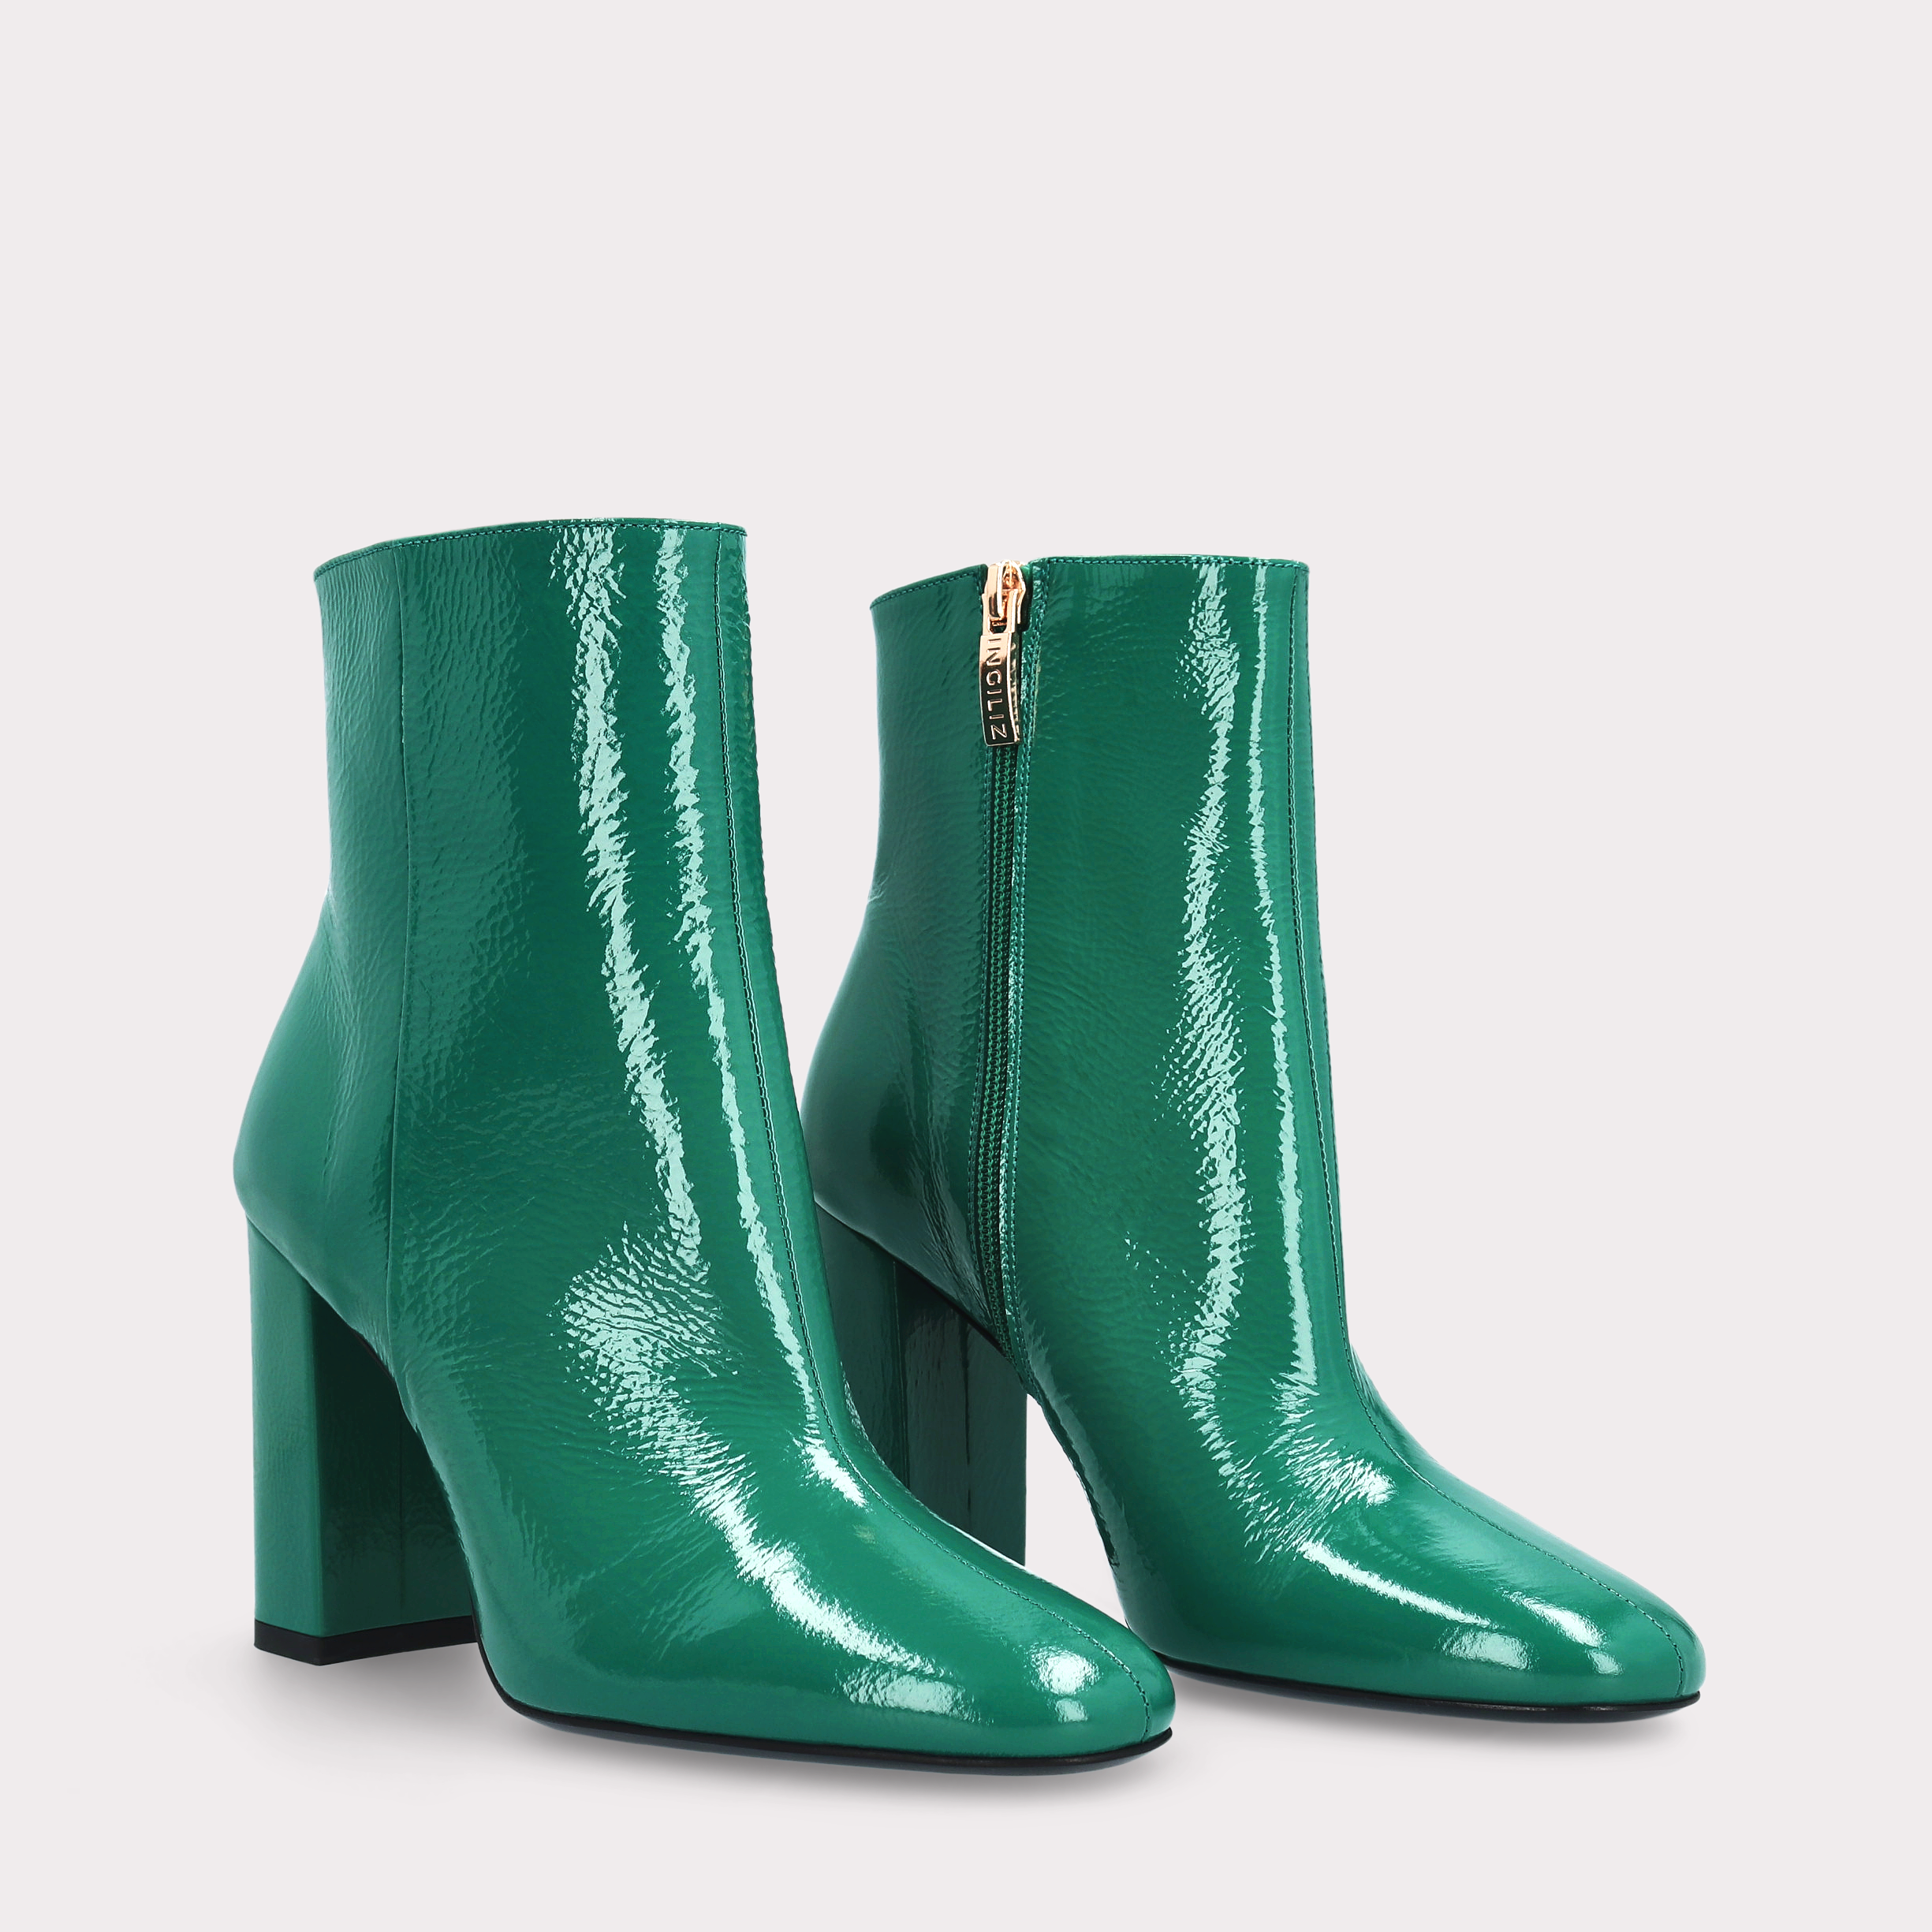 DELMA GREEN CRUSHED PATENT LEATHER ANKLE BOOTS